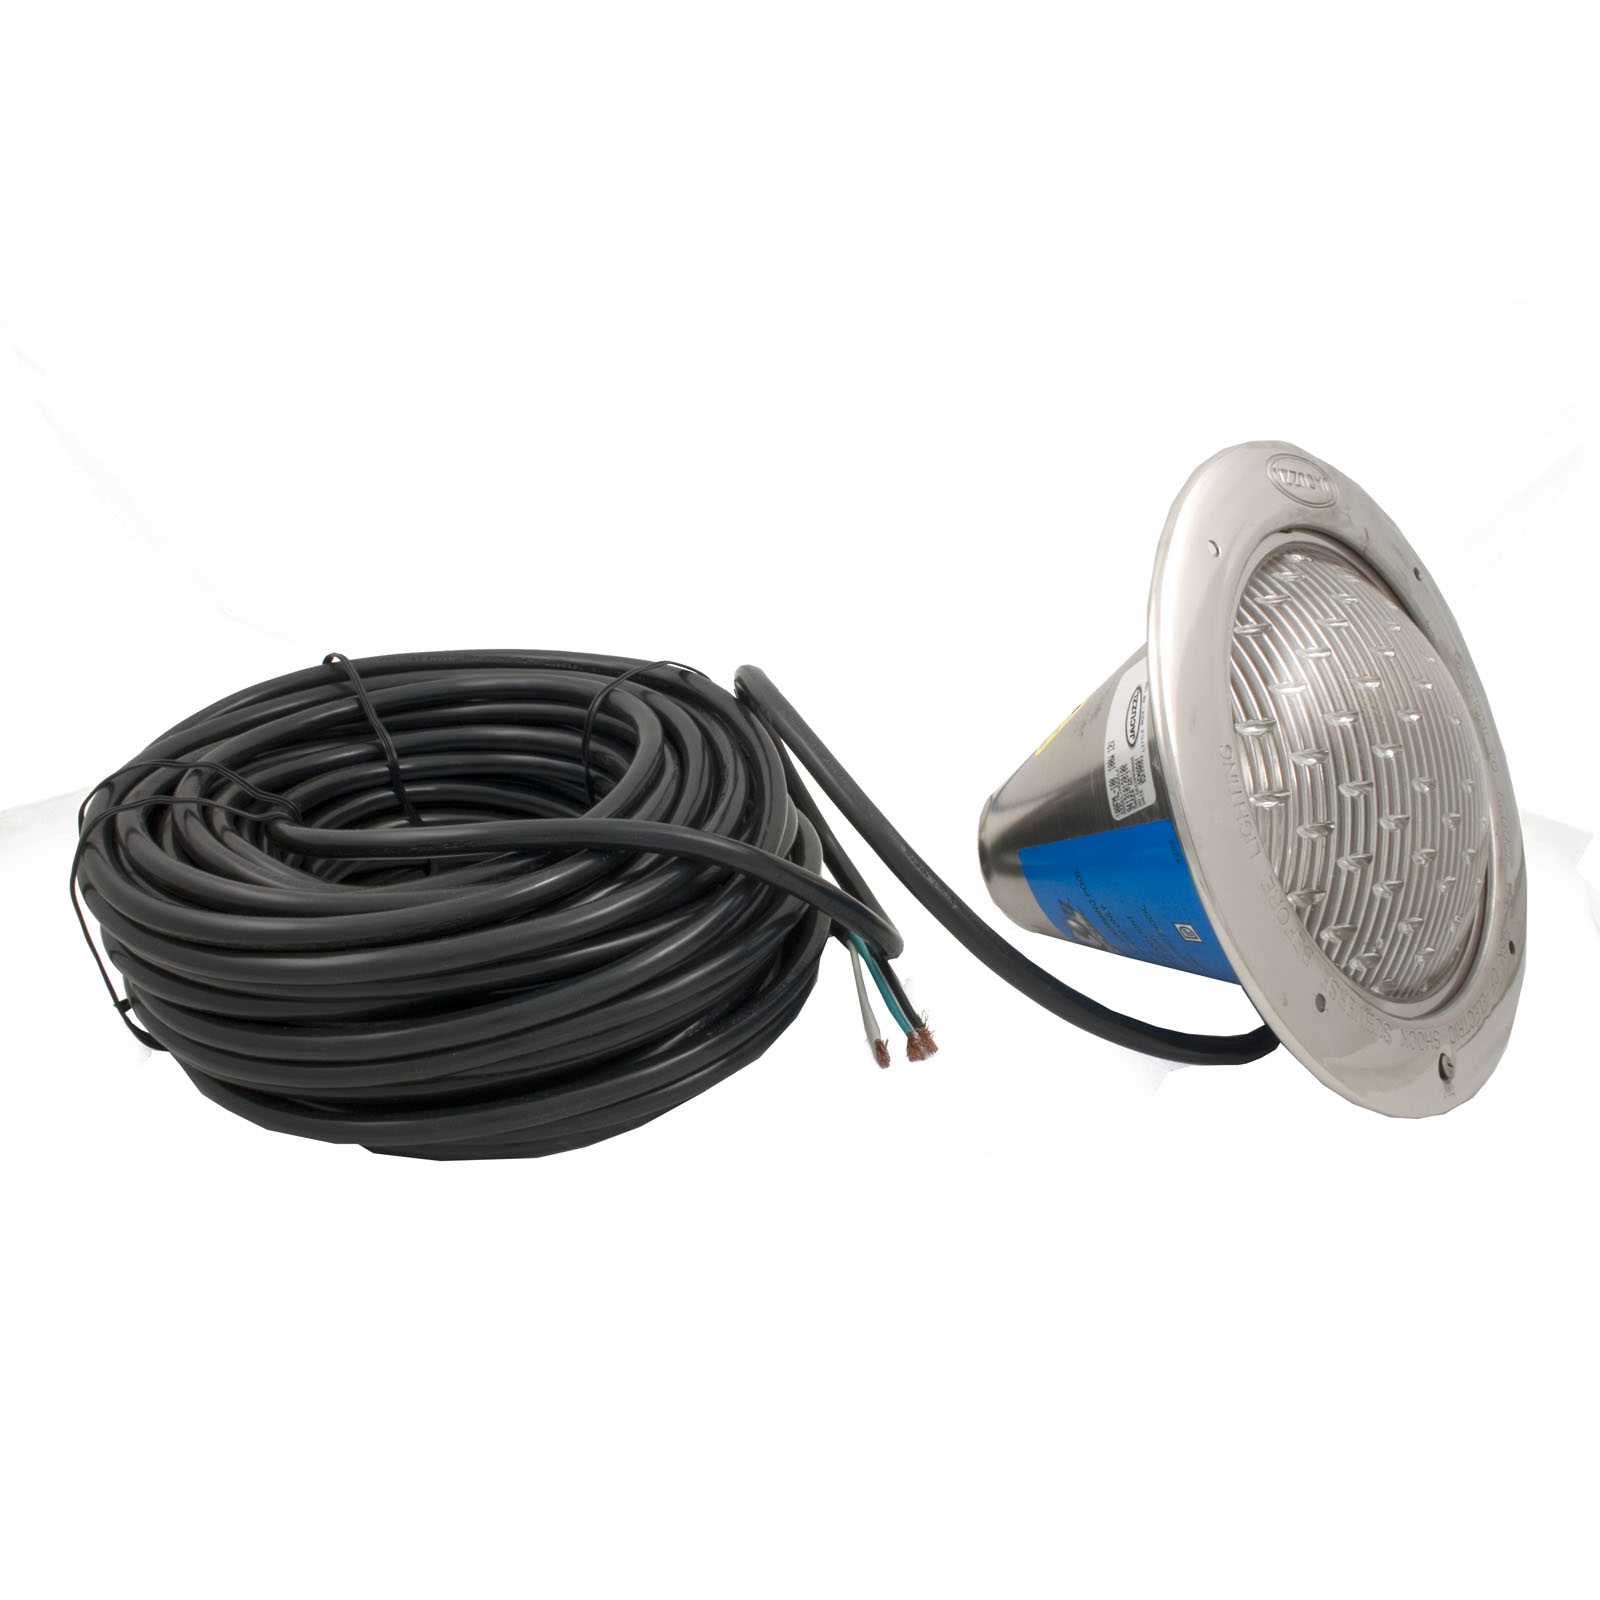 Picture of 9413-1012-0100 Pool Light Jacuzzi FullMoon 12V 100w with 100 foot cord